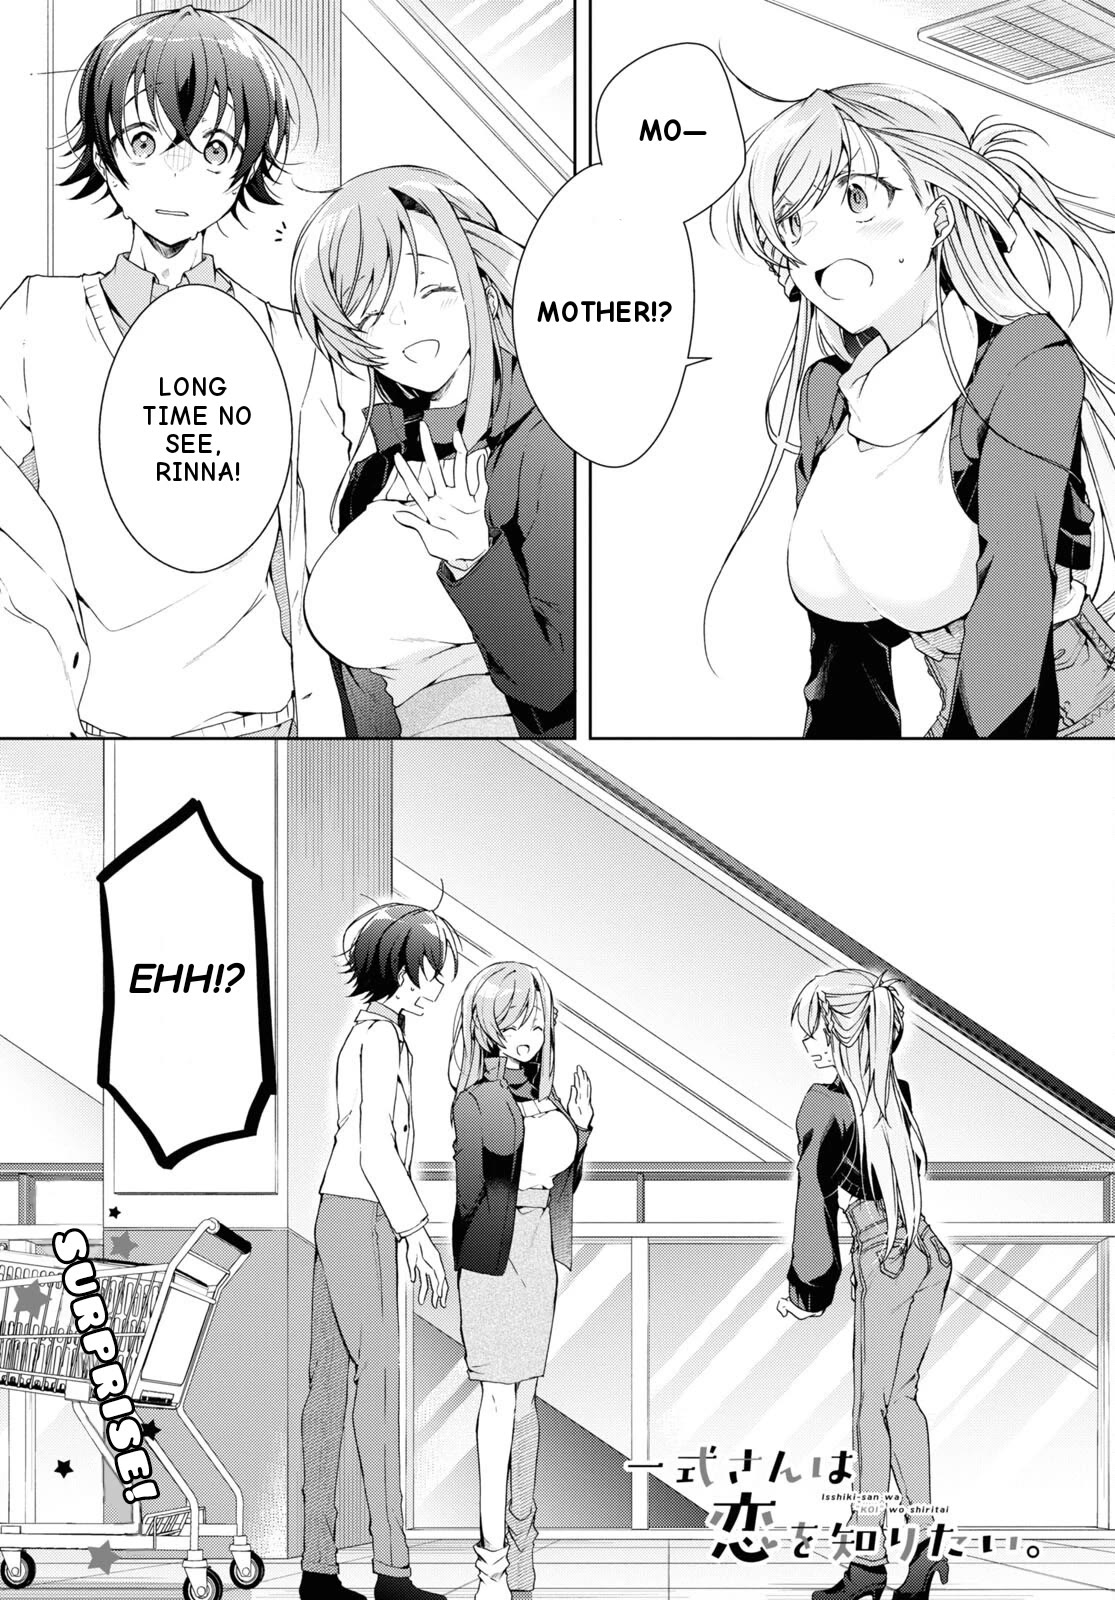 Isshiki-san Wants to Know About Love. - chapter 27 - #2